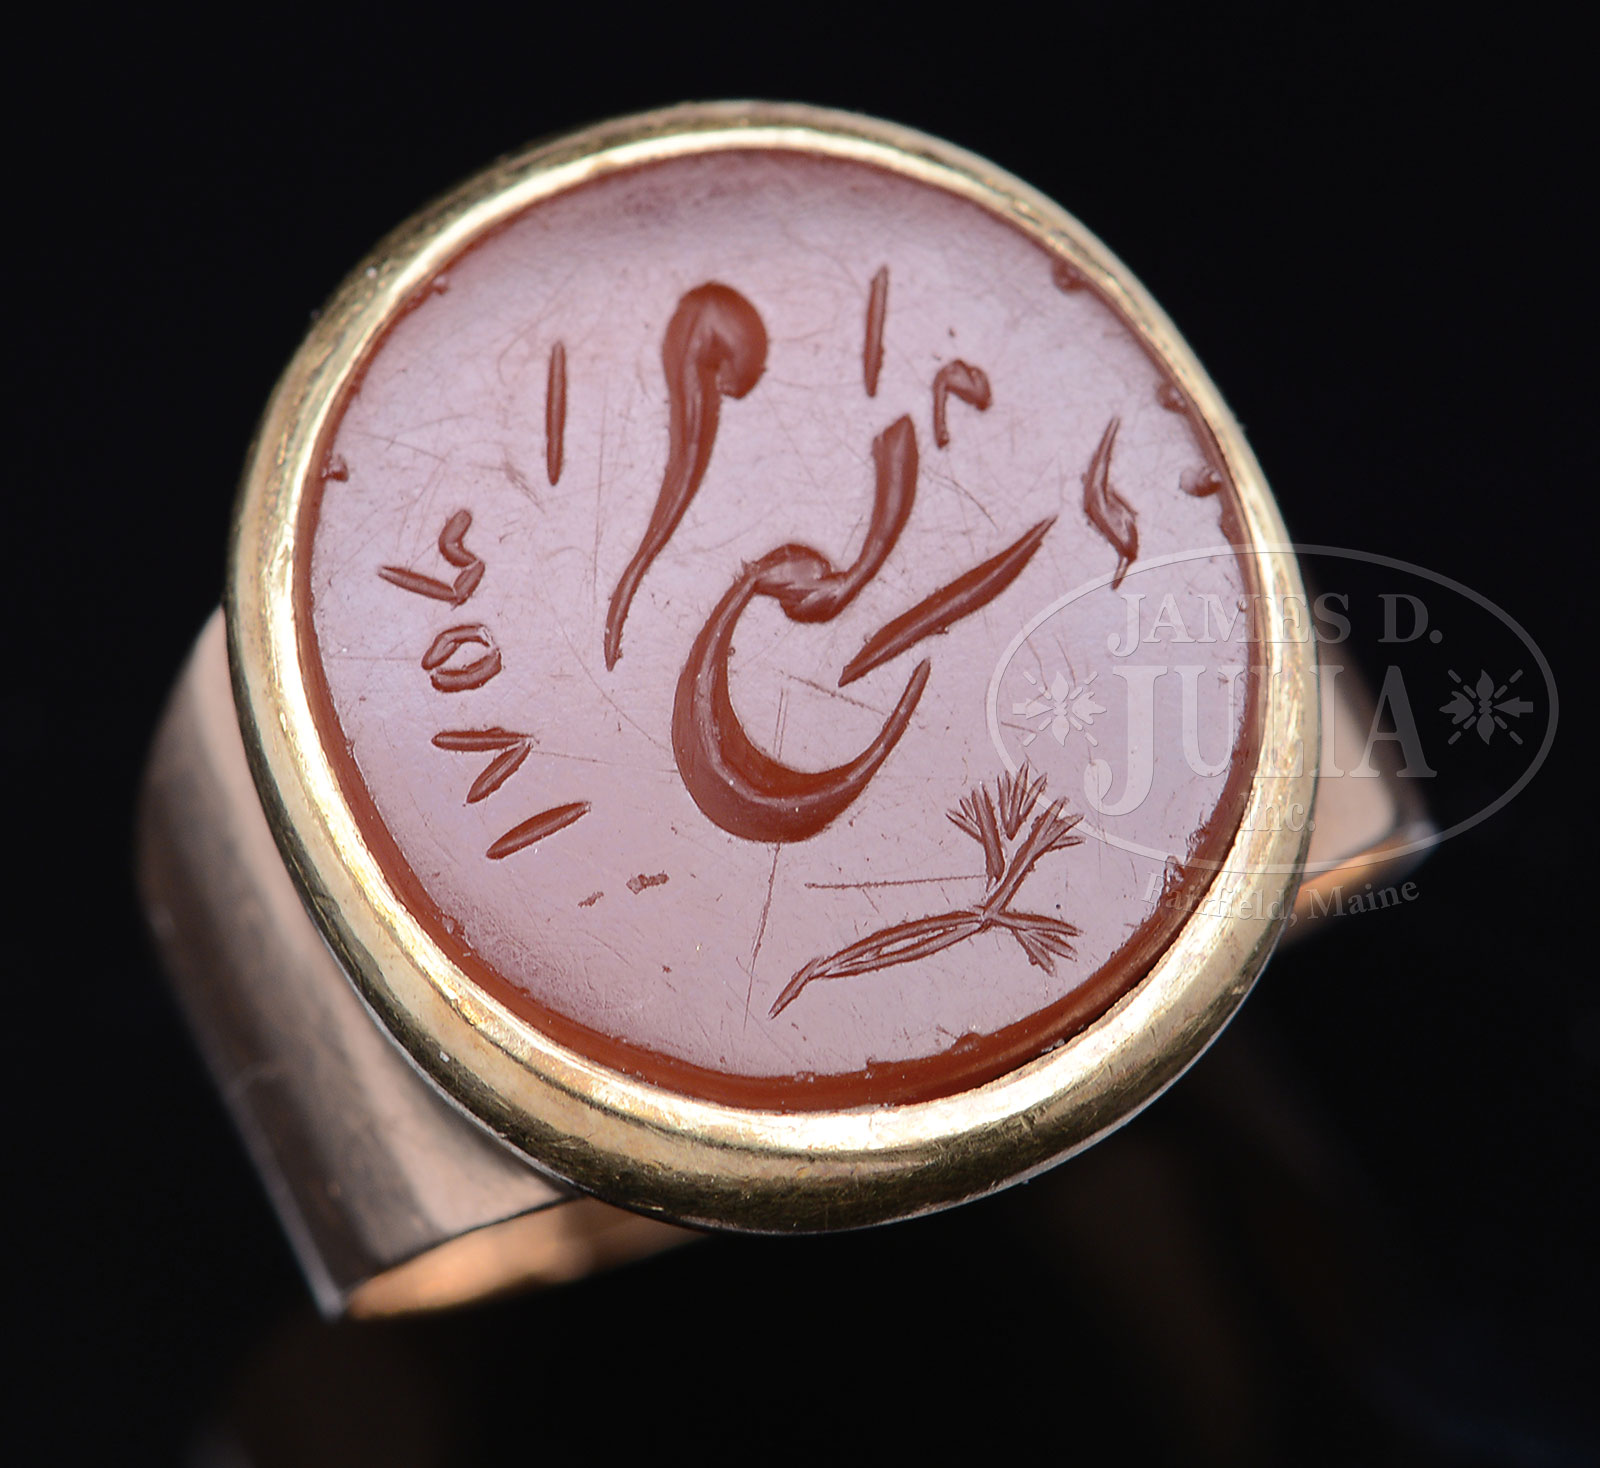 GOLD SIGNET RING GIVEN TO COMMODORE STEPHEN DECATUR IN 1805 FROM THE BEY OF TUNIS UPON HIS SURRENDER OF TRIPOLI.